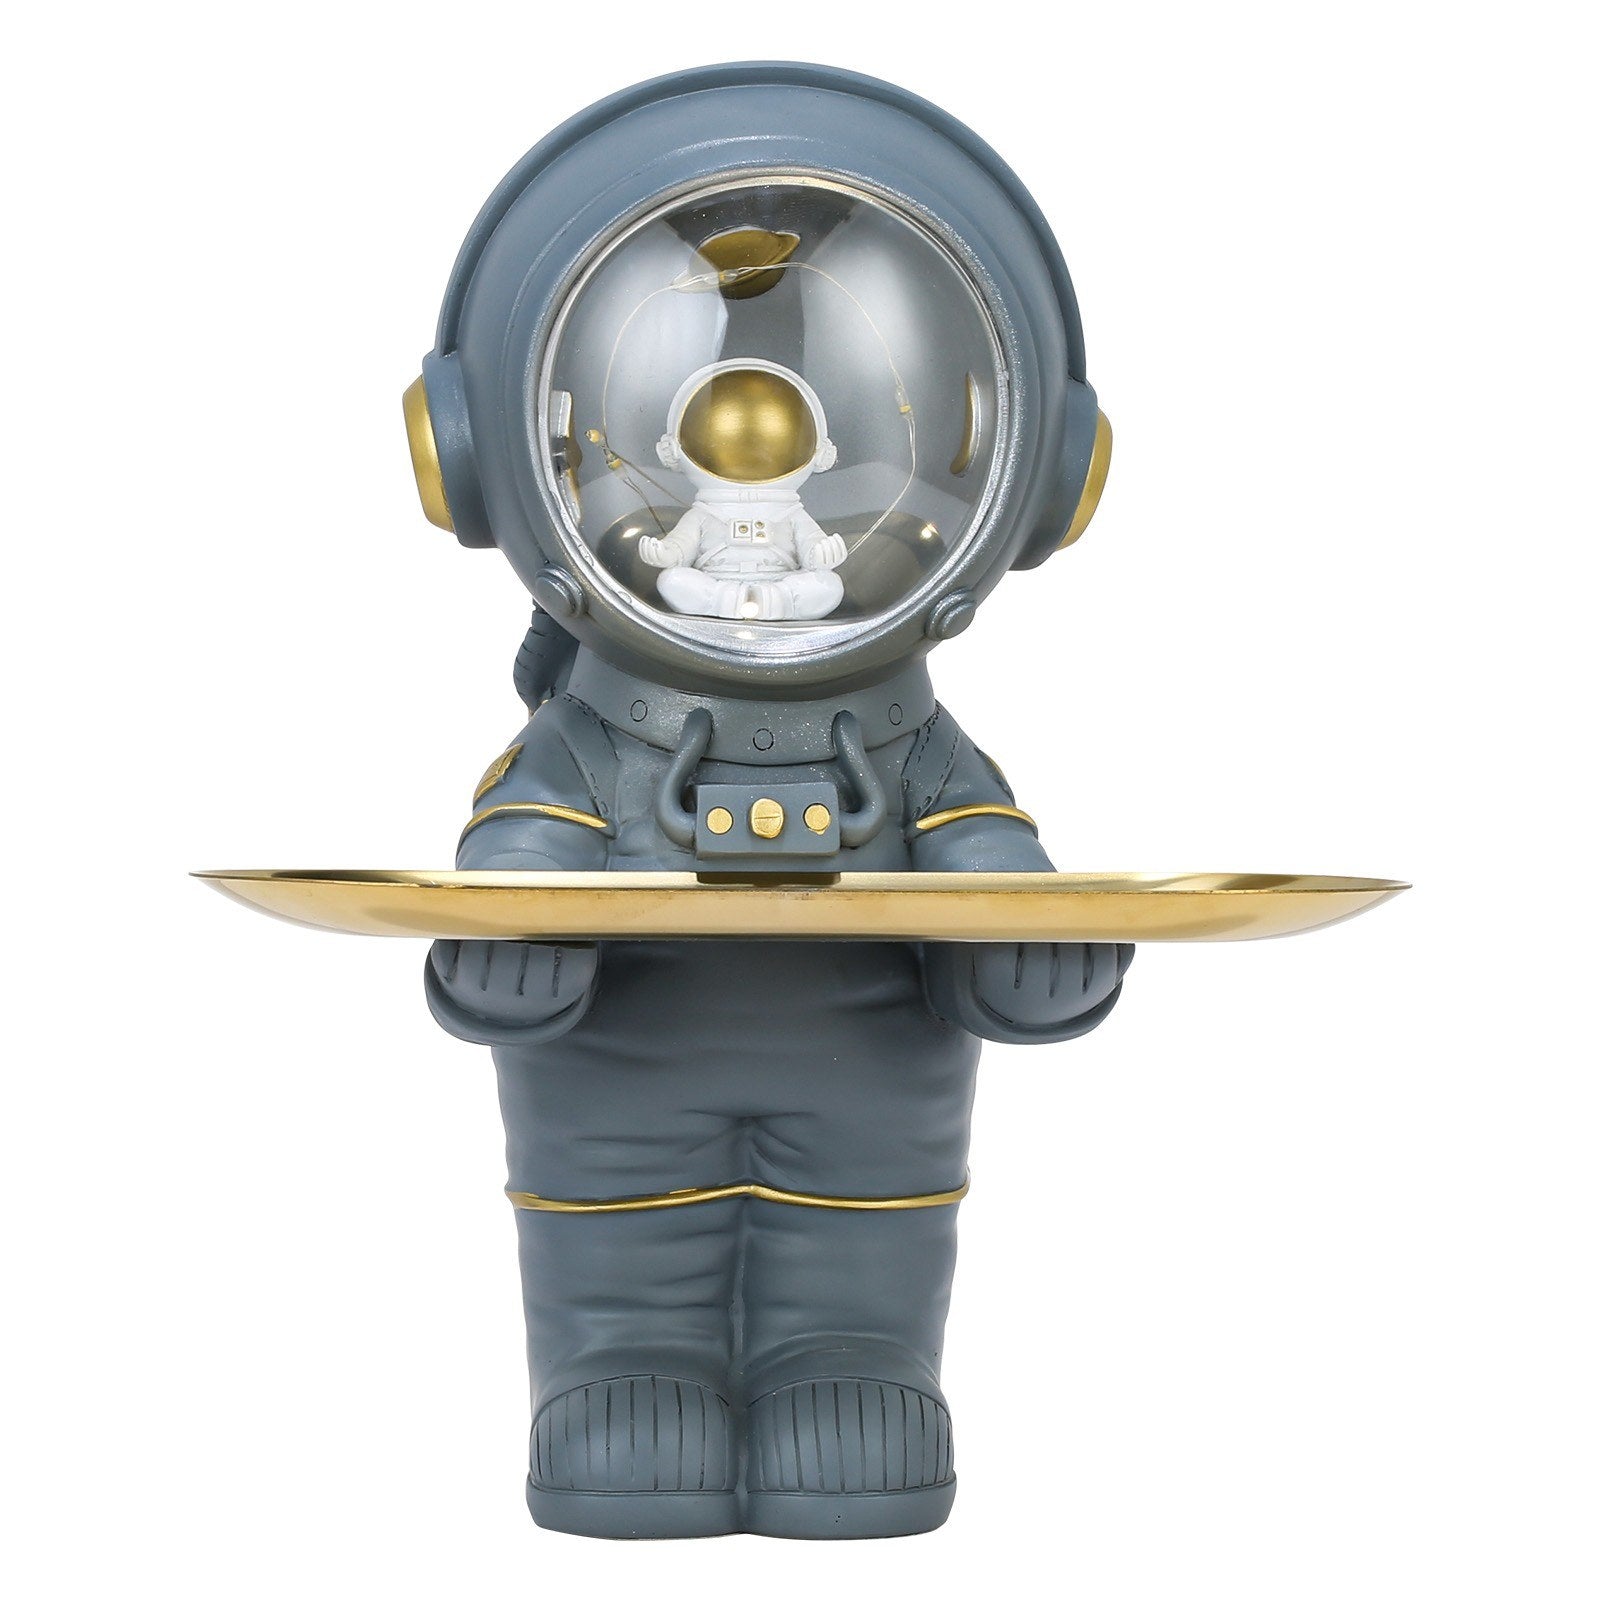 This Astronaut figurine will help you on your journey through space, mars and cosmos. It is the perfect gift for any astronaut.